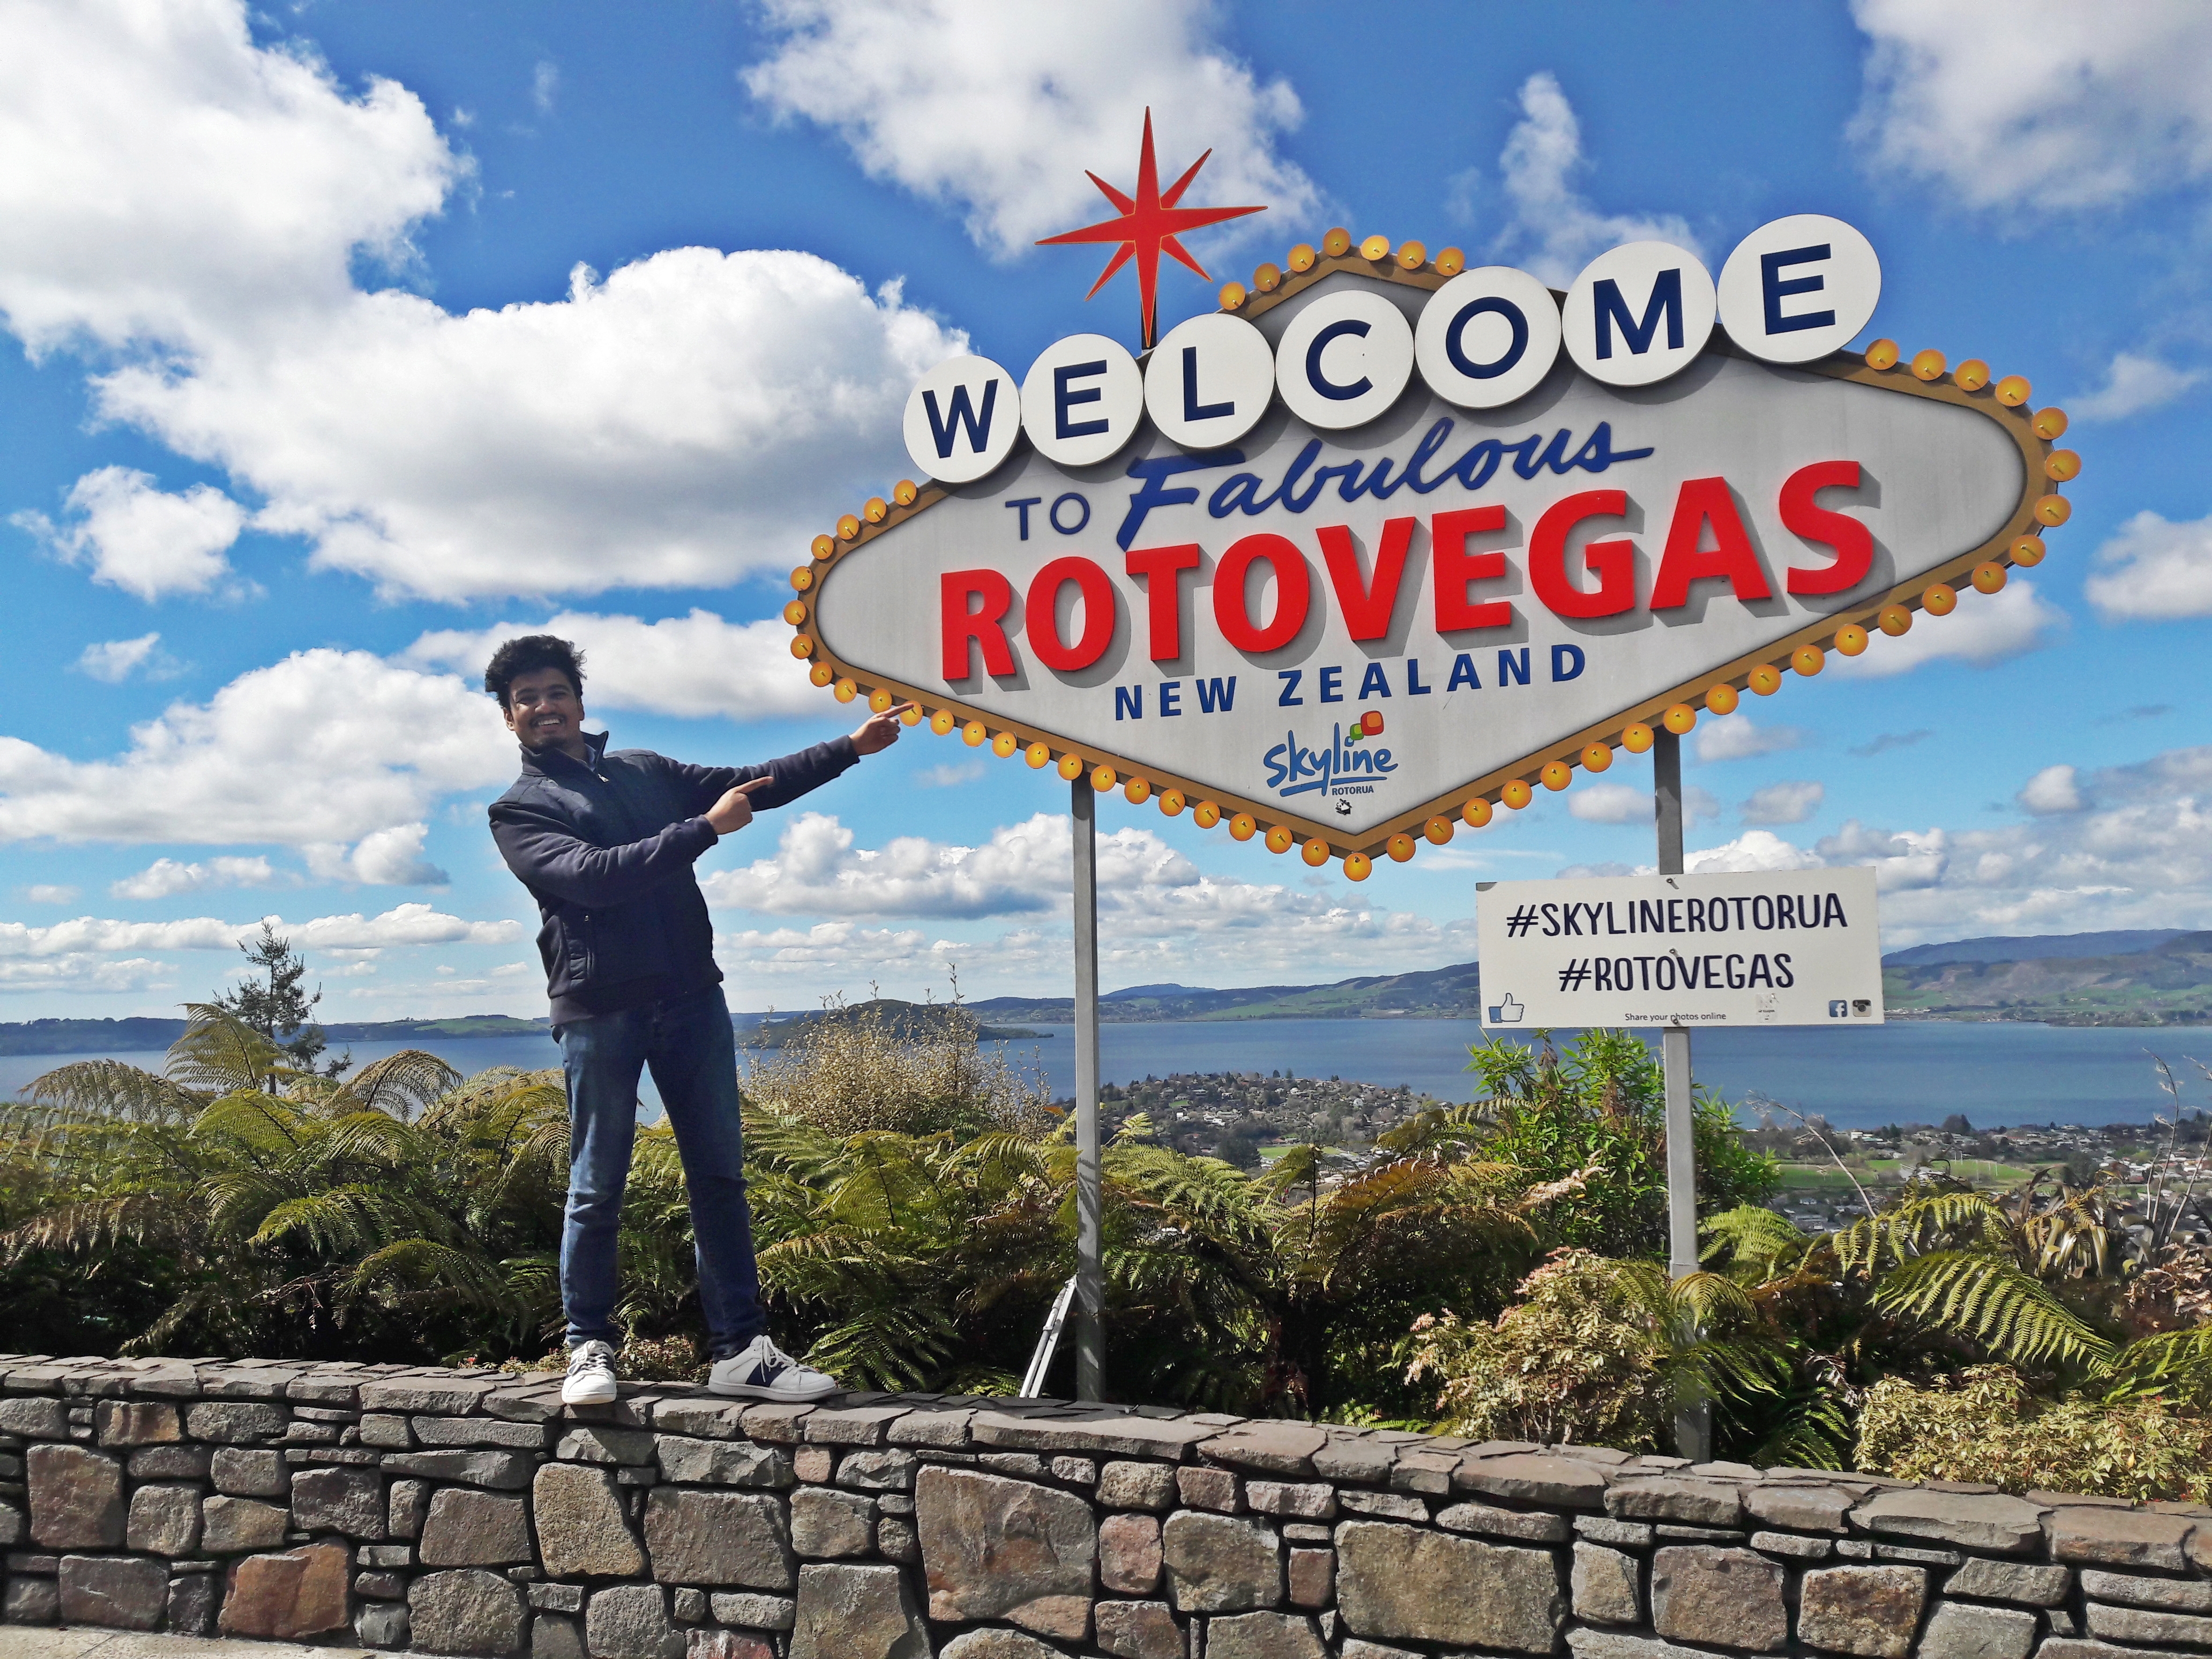 Fun adventures with family at Rotovegas New Zealand